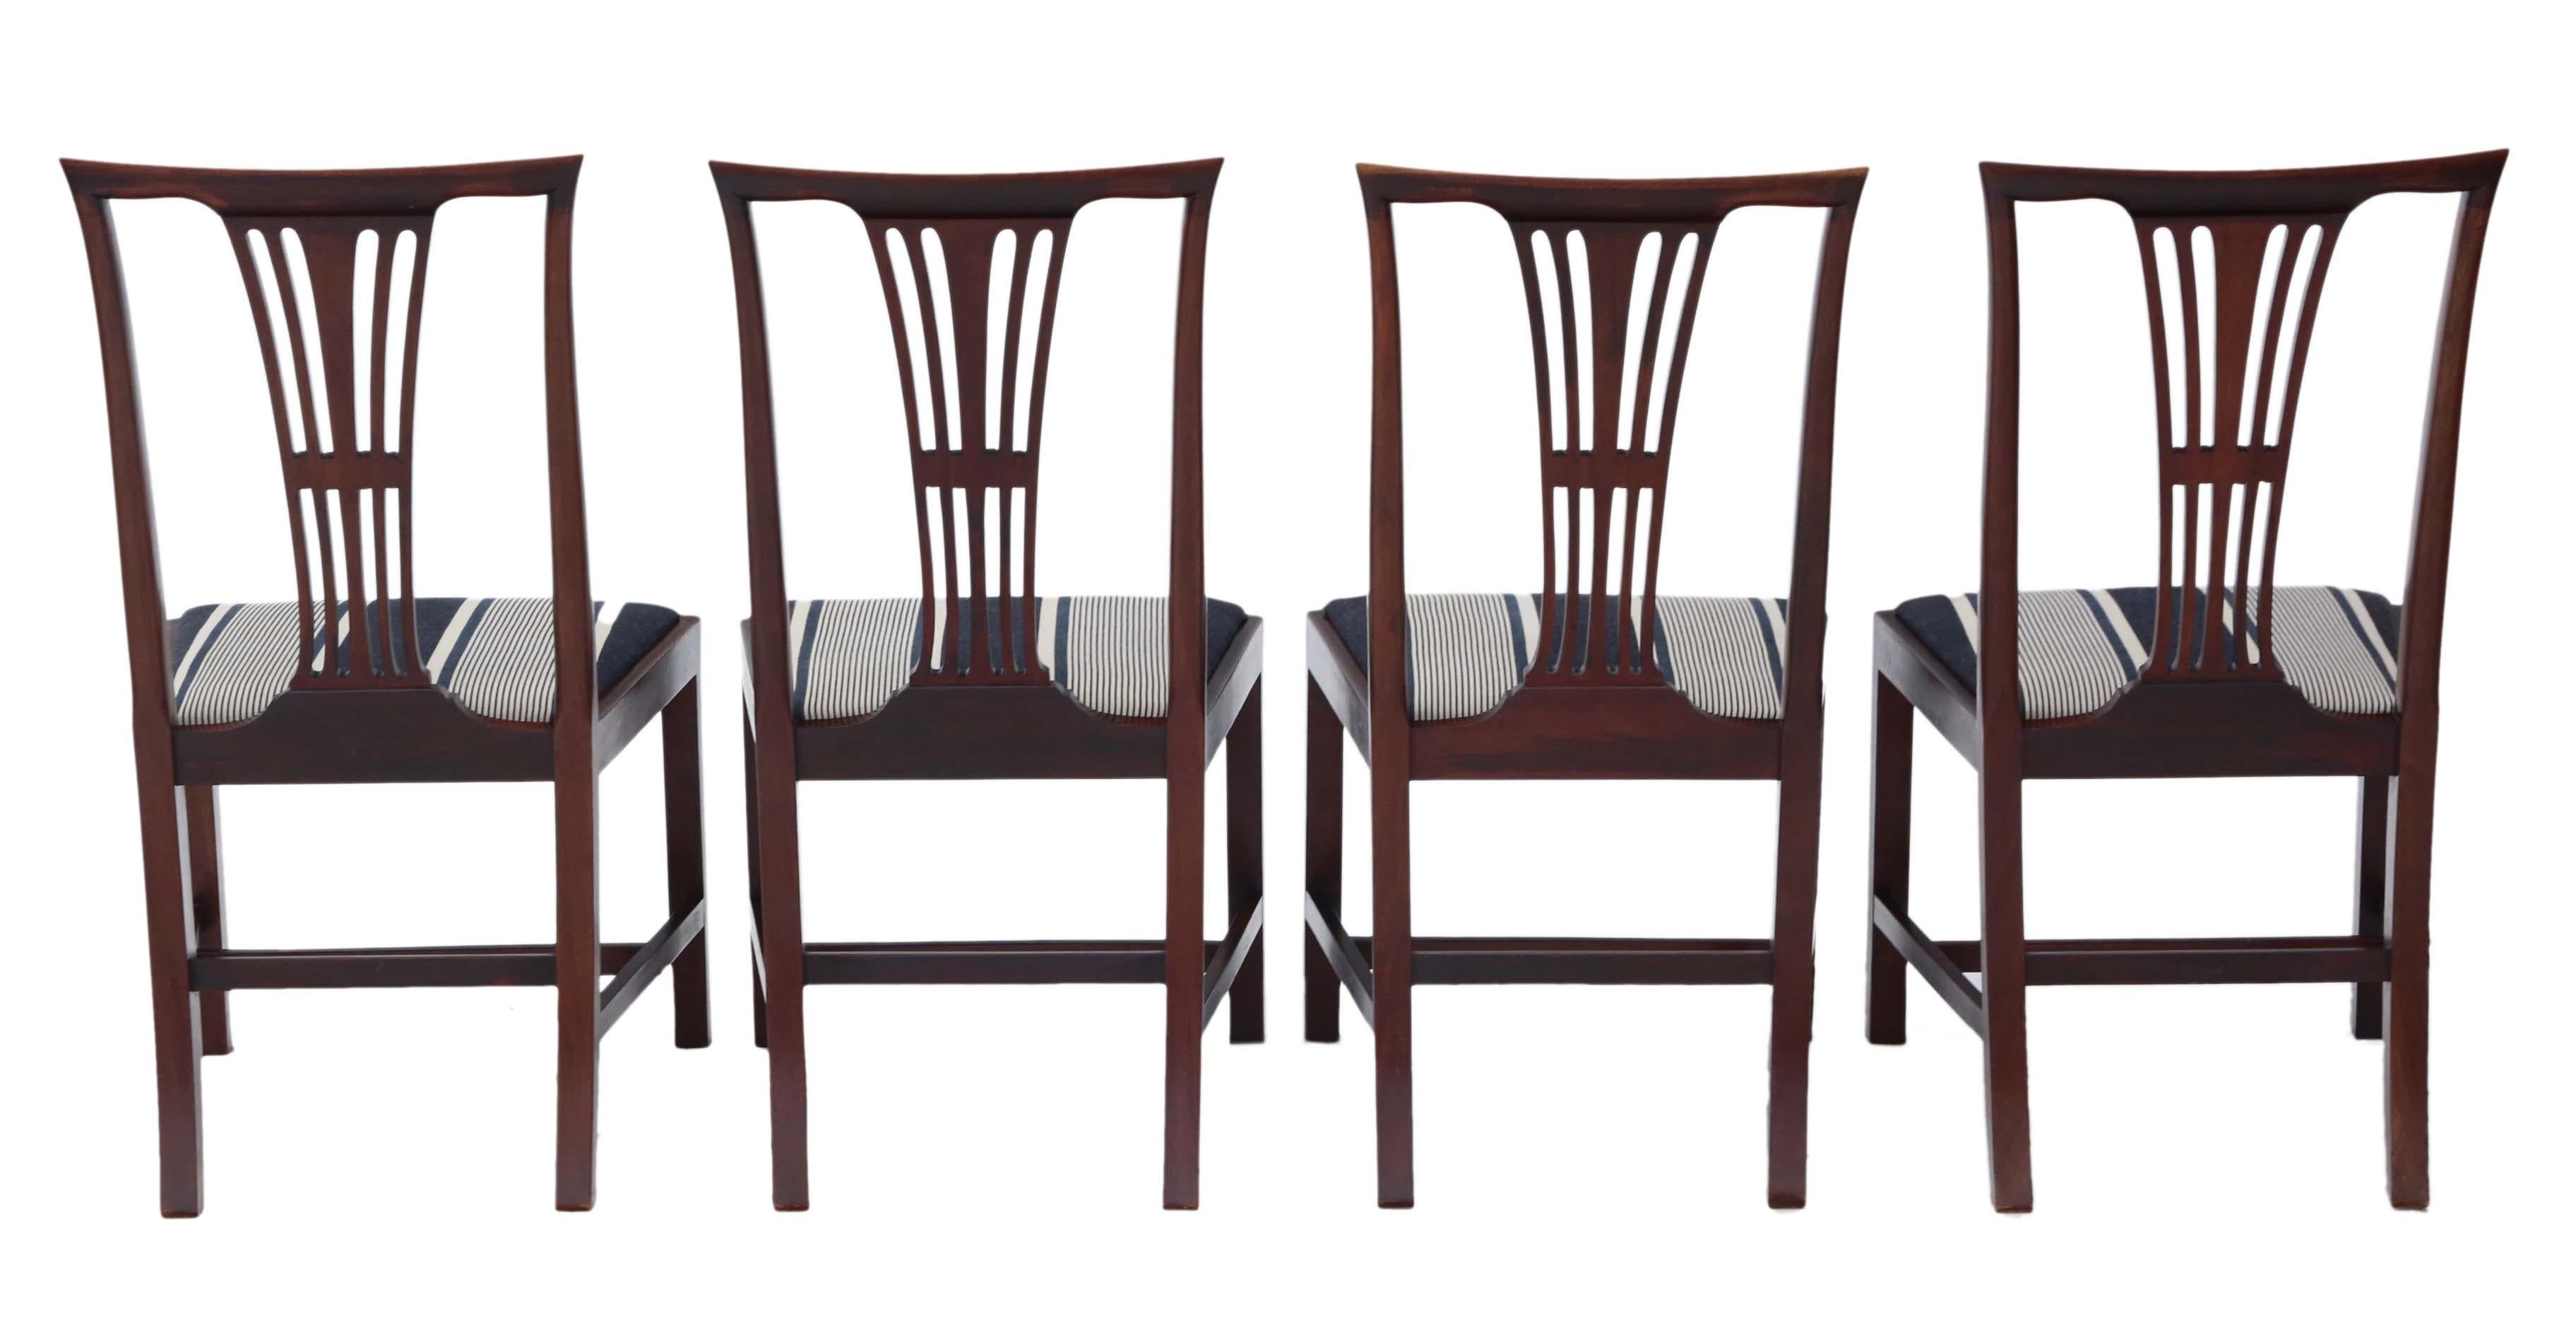 Antique quality set of 4 Victorian circa 1900 mahogany dining chairs.

Solid and strong with no loose joints and no woodworm.

The upholstery is new.

Would look great in the right location!

Overall maximum dimensions: 52cm W x 52cm D x